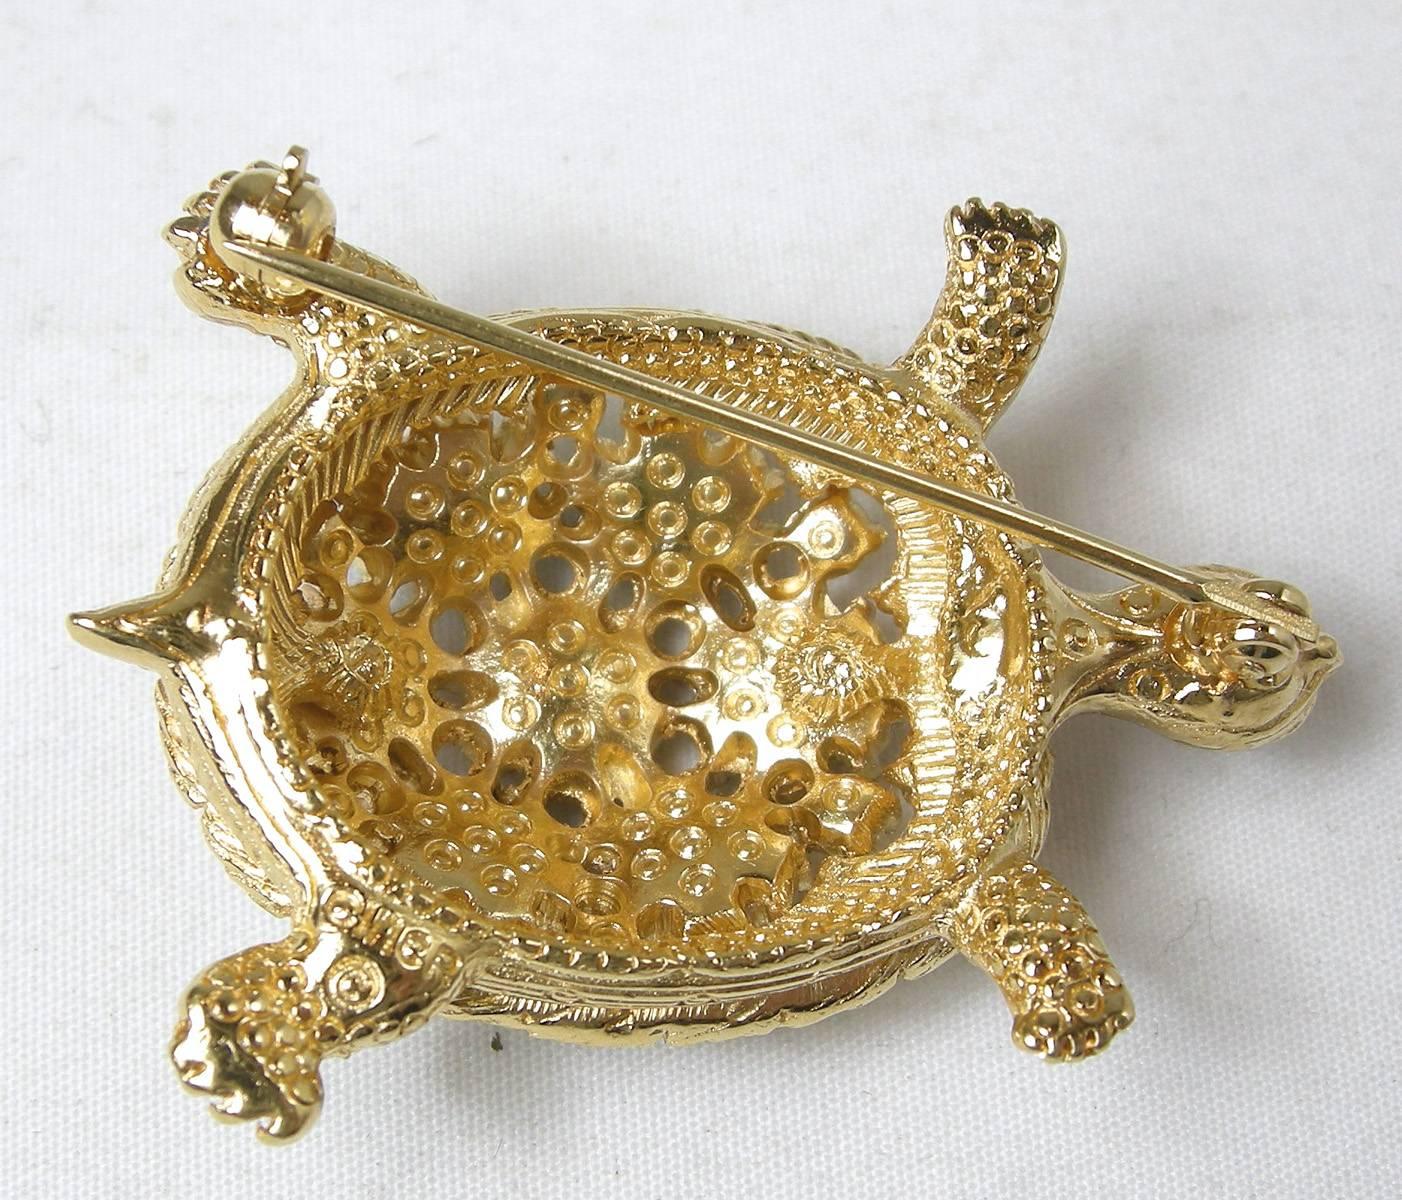 This1960s Ciner turtle brooch is adorable. There are clear rhinestones on his face and feet, with faux rubies, emeralds and sapphires on his back. It is made in a gold tone setting and measures 1-1/2” x 1-1/4”. It is in a gold tone setting and is